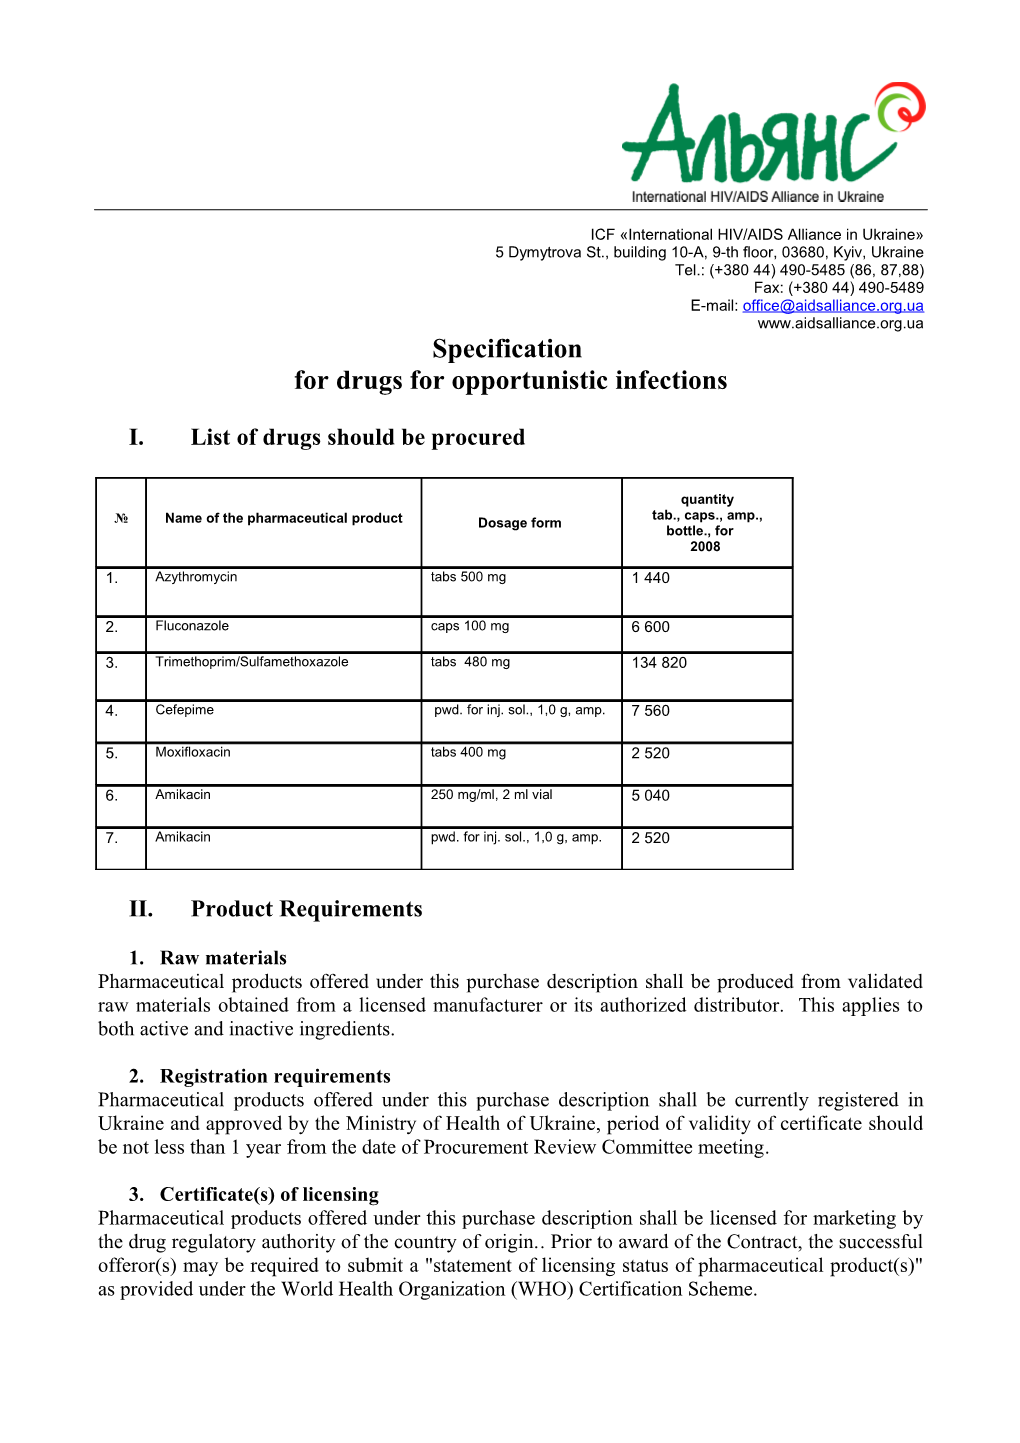 For Drugs for Opportunistic Infections